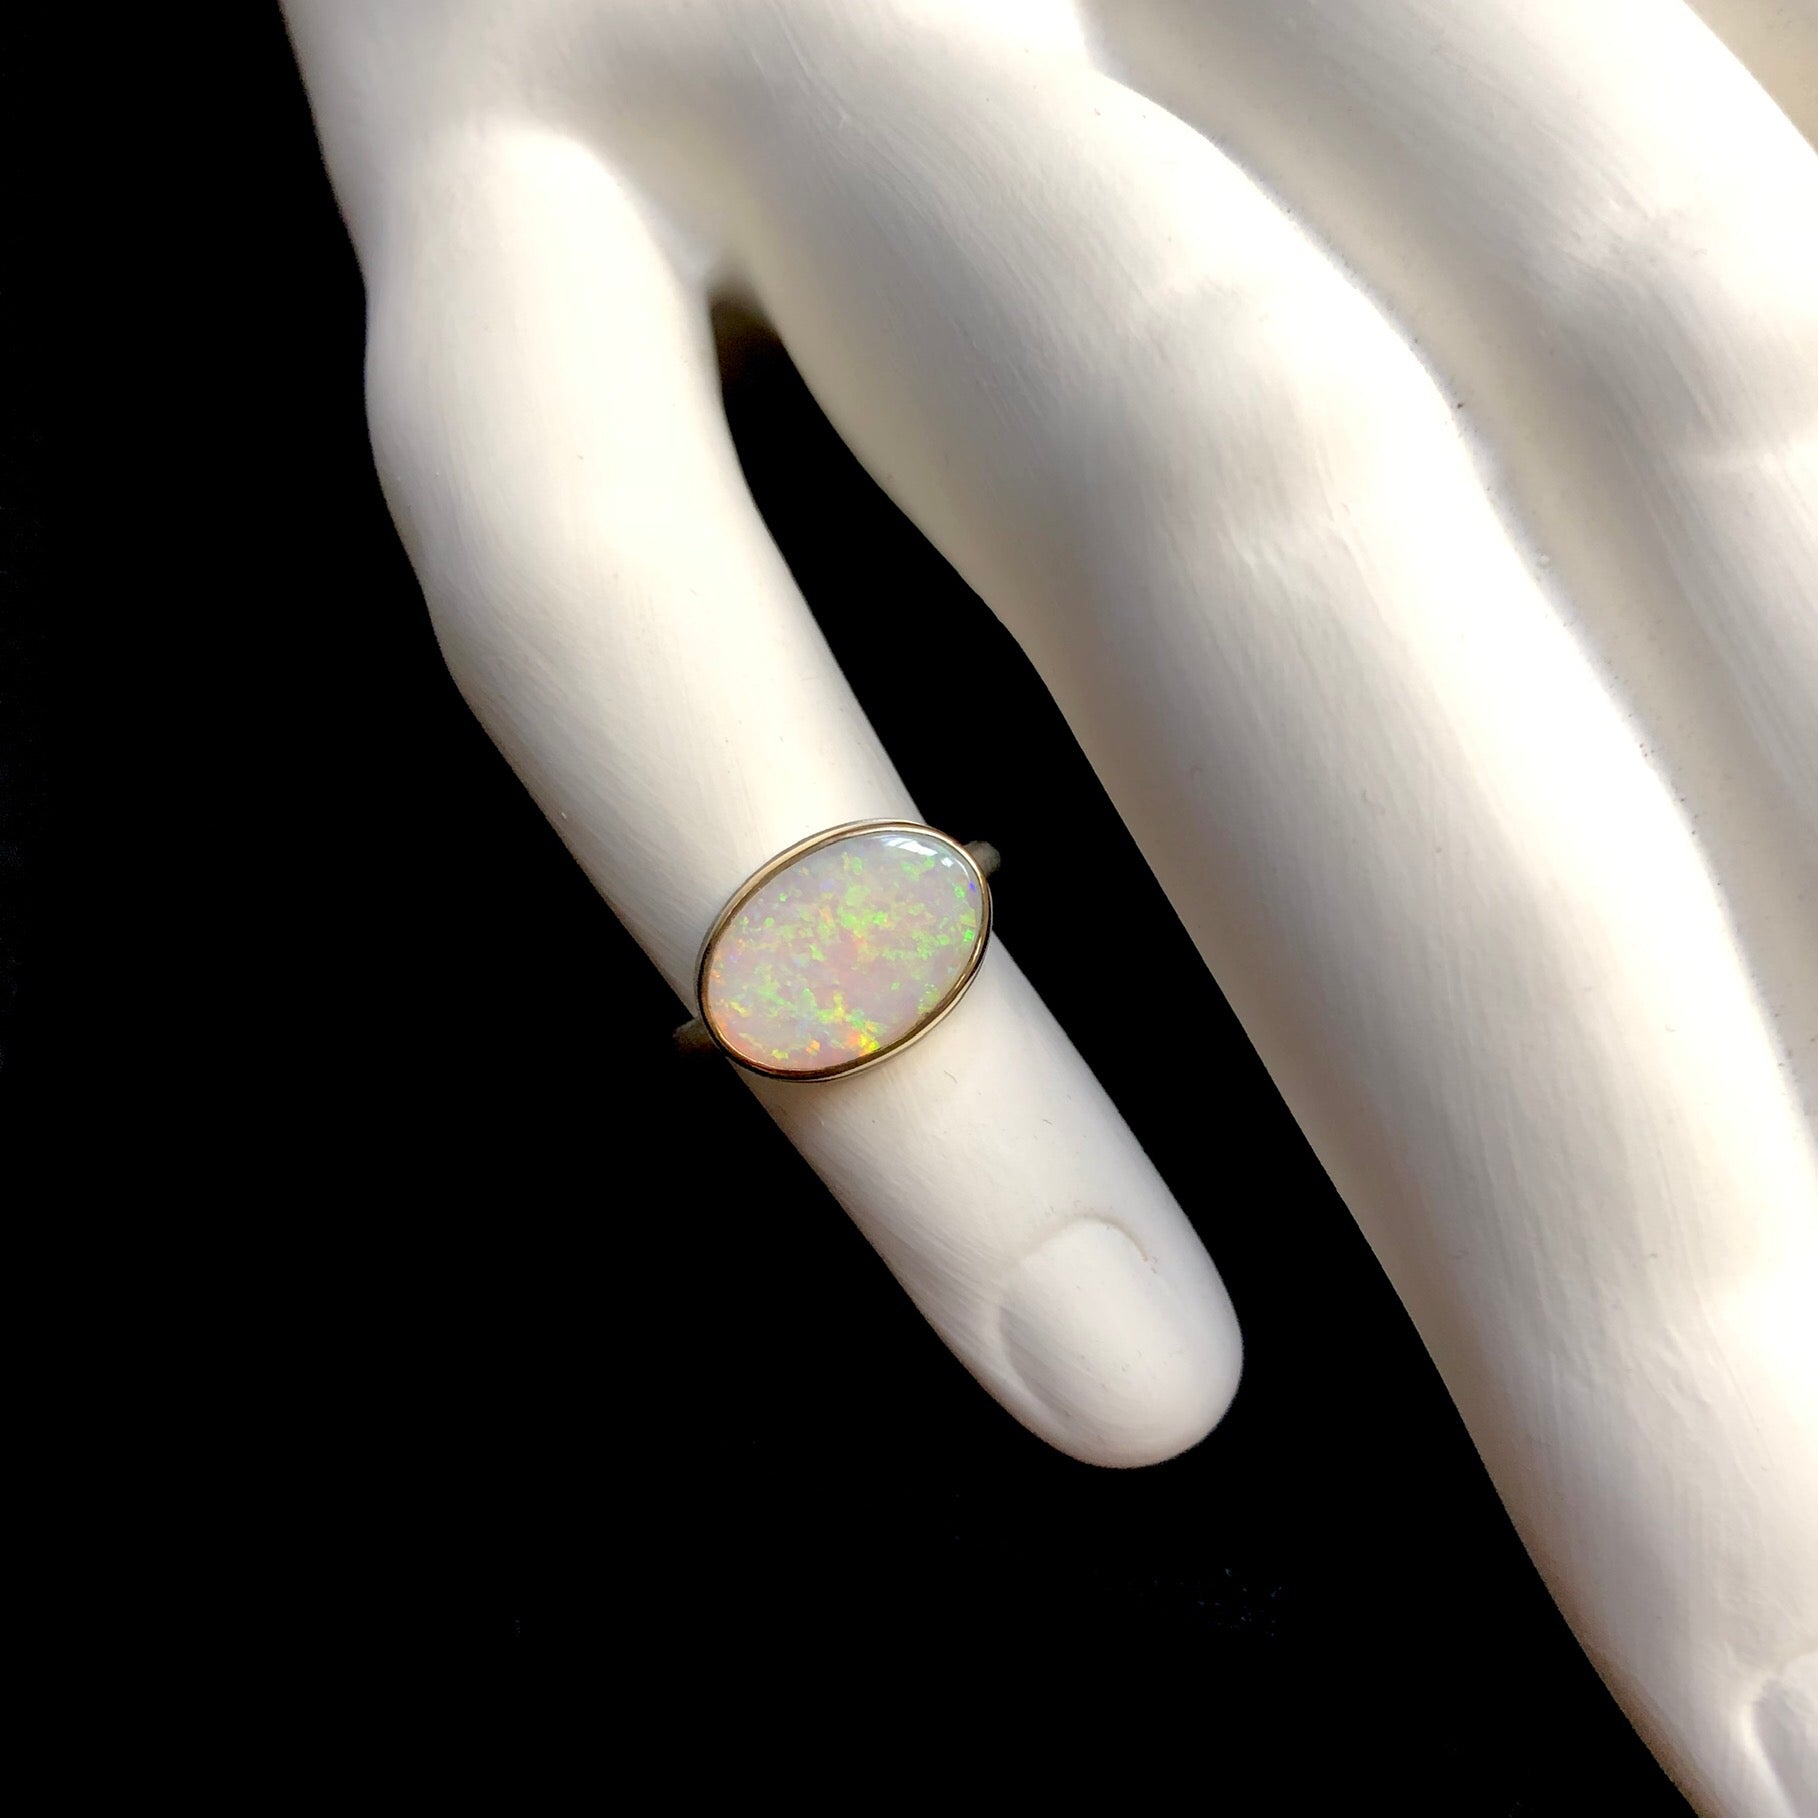 Top view of oval iridescent white colored Mintabe Opal ring on white ceramic finger